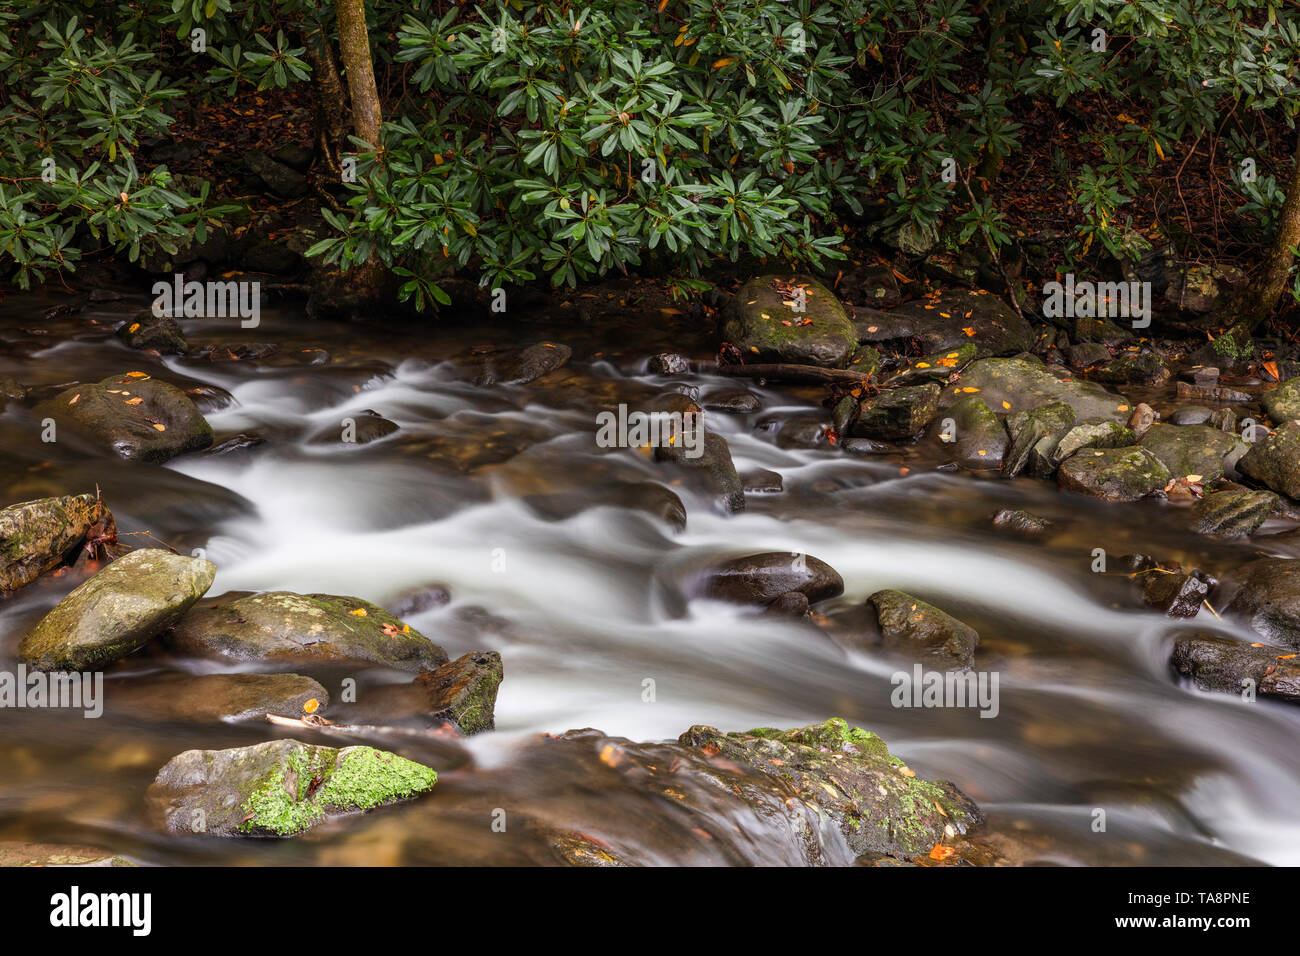 West Prong Little River, Laurel Creek Road, Great Smoky Mountains National Park, Tennessee Stock Photo